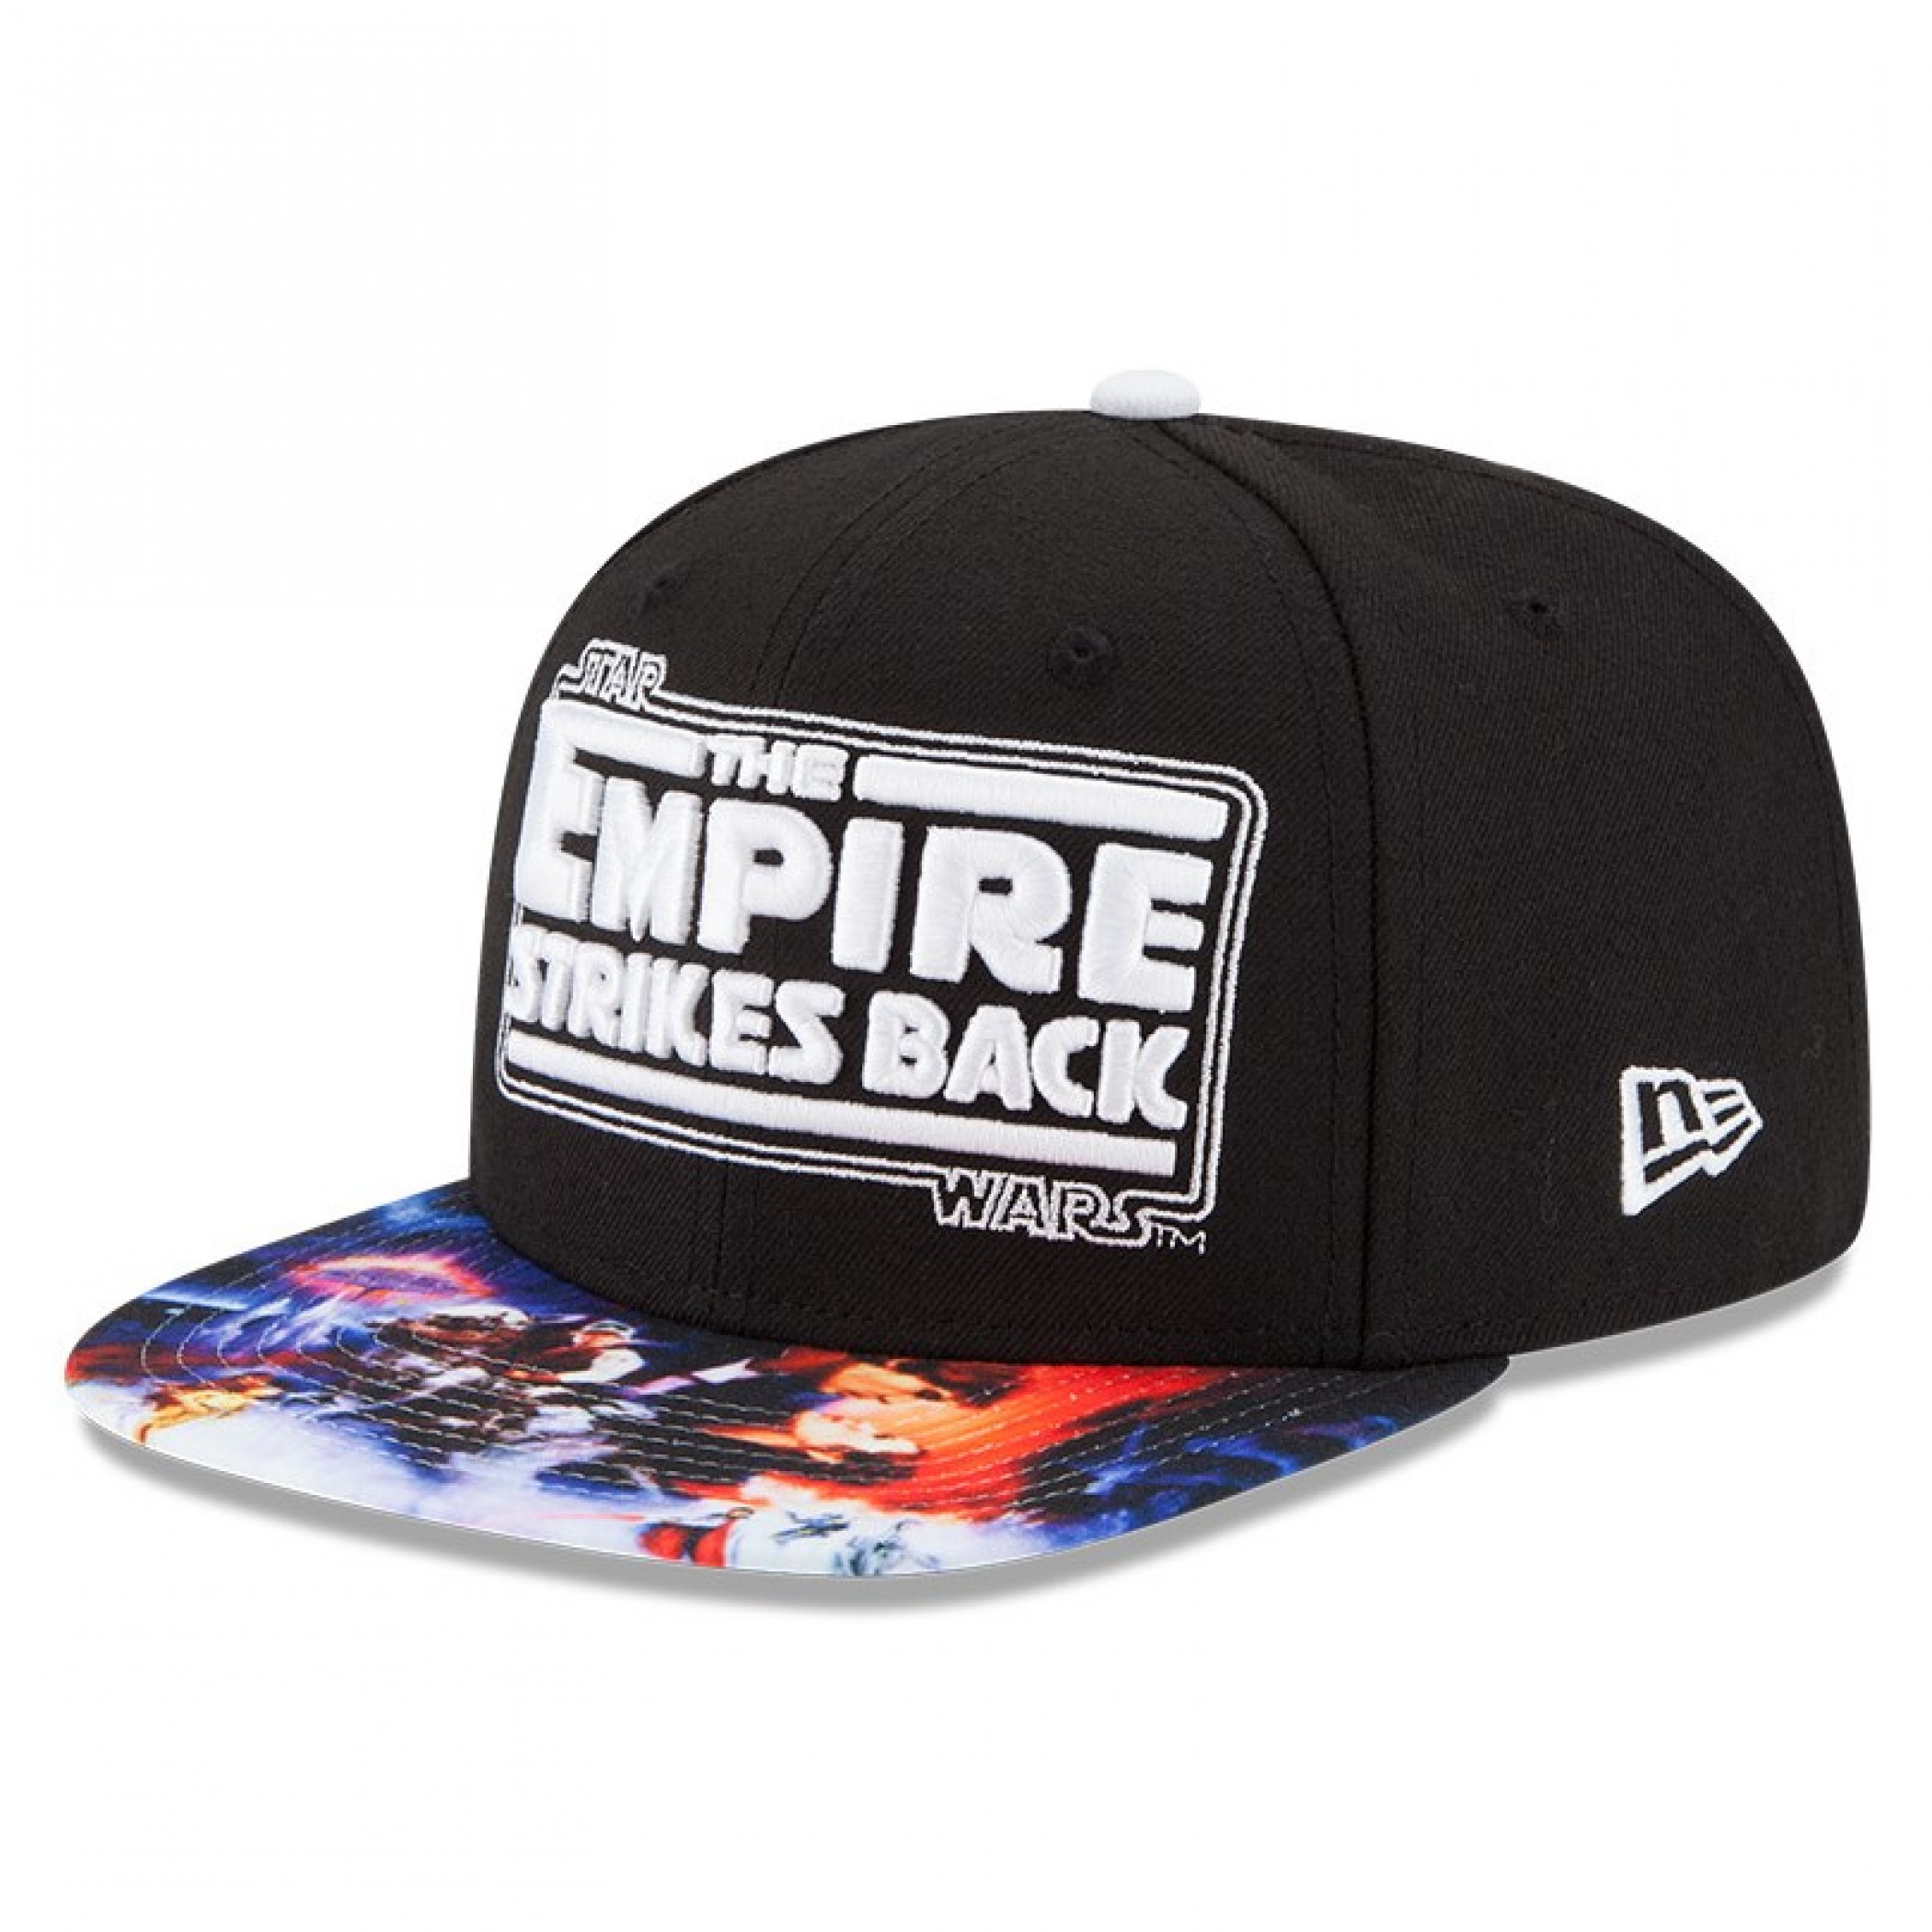 Star Wars Empire Strikes Back Sublimated Bill New Era 9Fifty Adjustable Hat